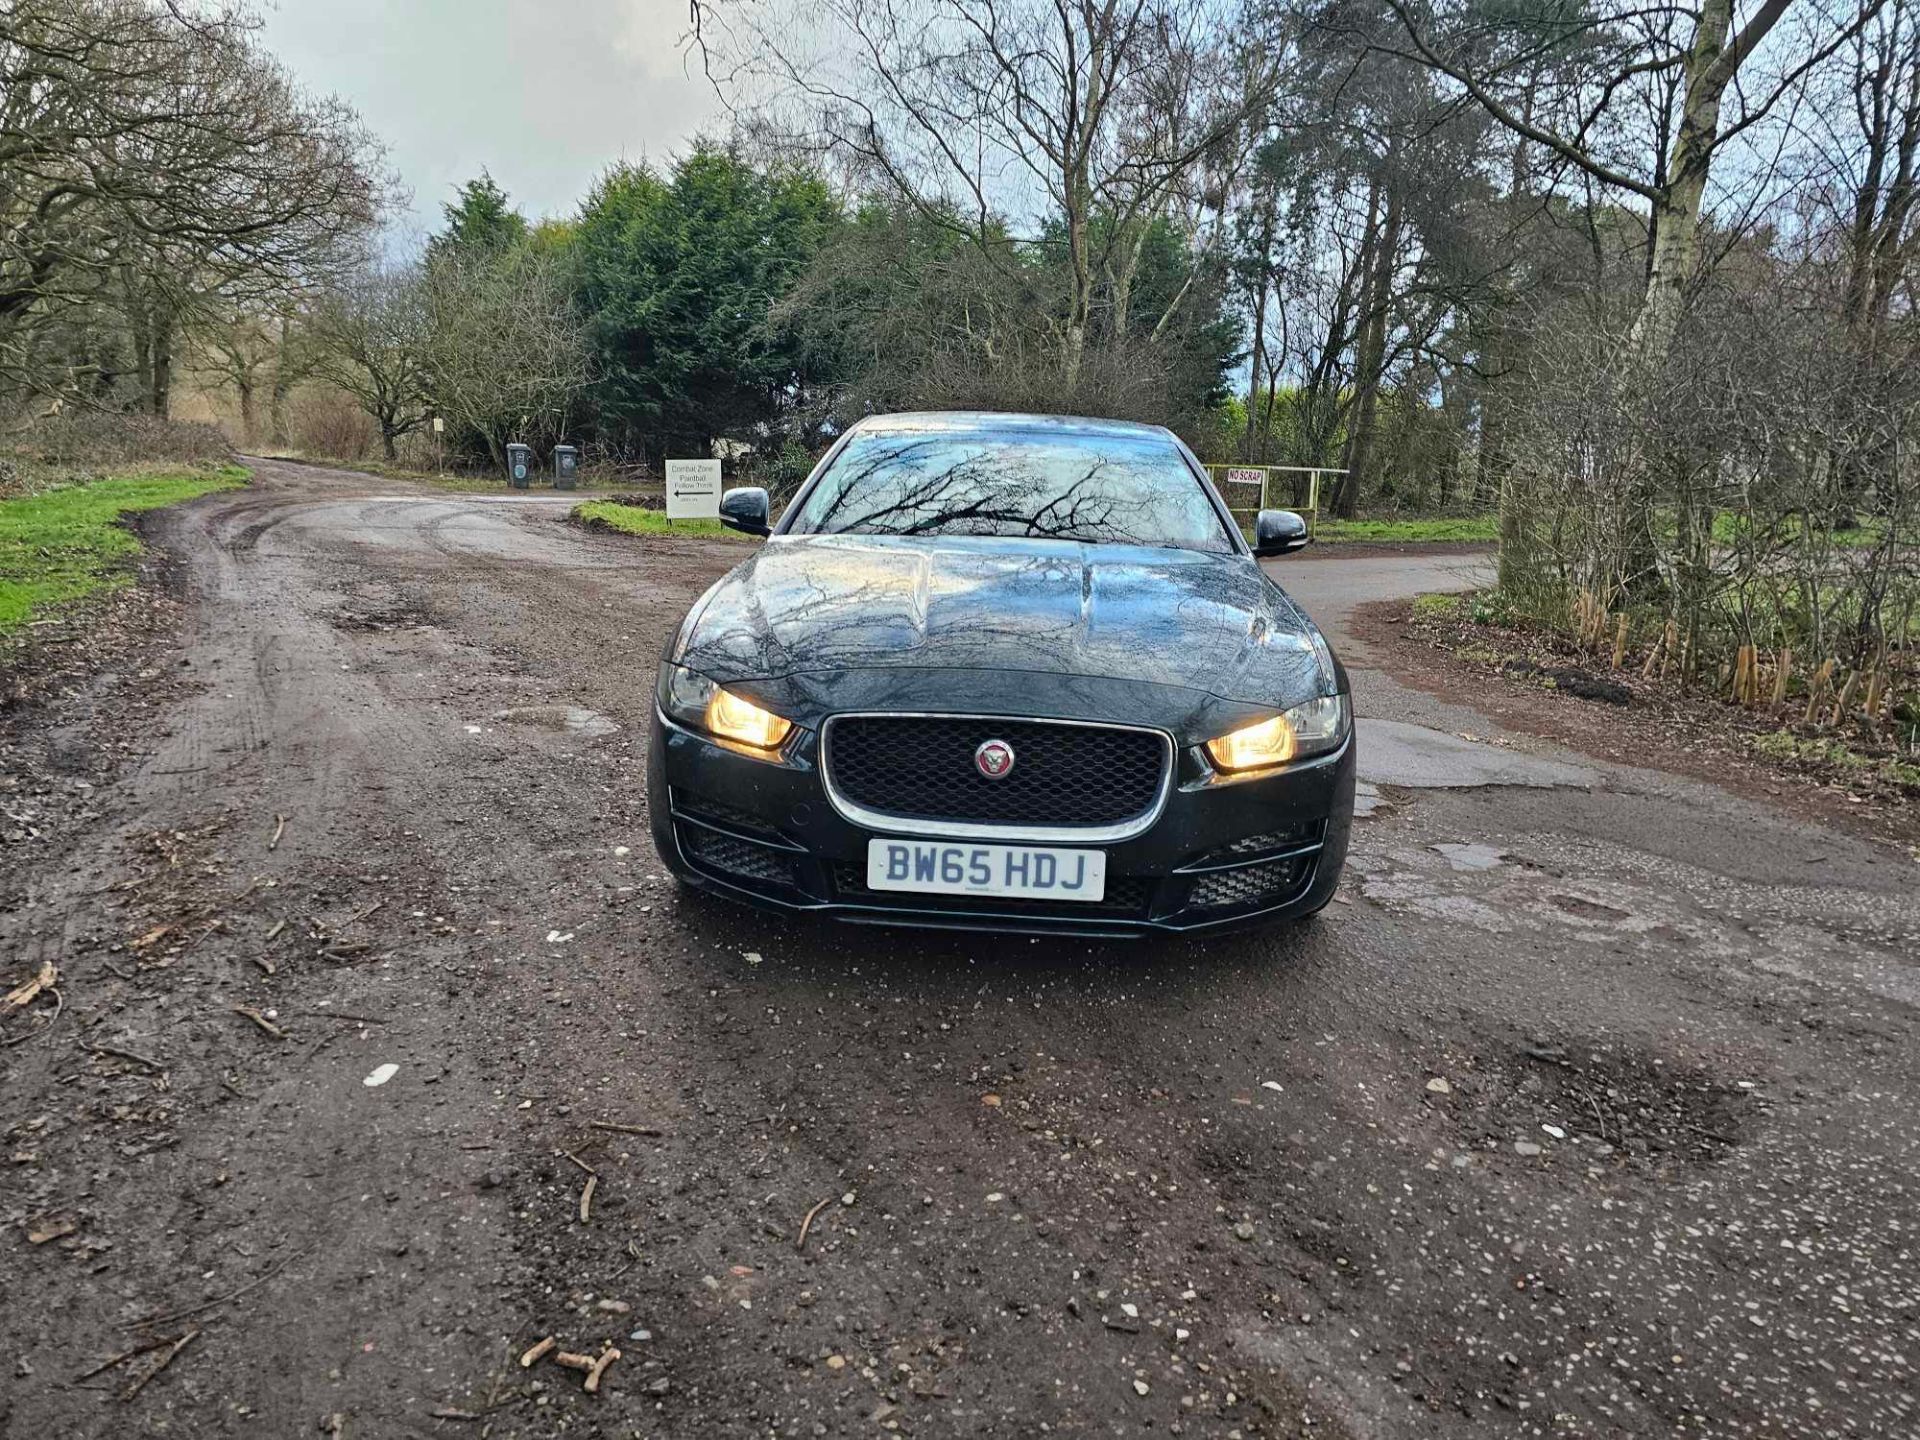 2015 65 JAGUAR XE SALOON - STARTS AND DRIVES BUT ENGINE IS NOISY - ALLOY WHEELS - 5 SERVICES. - Image 8 of 10